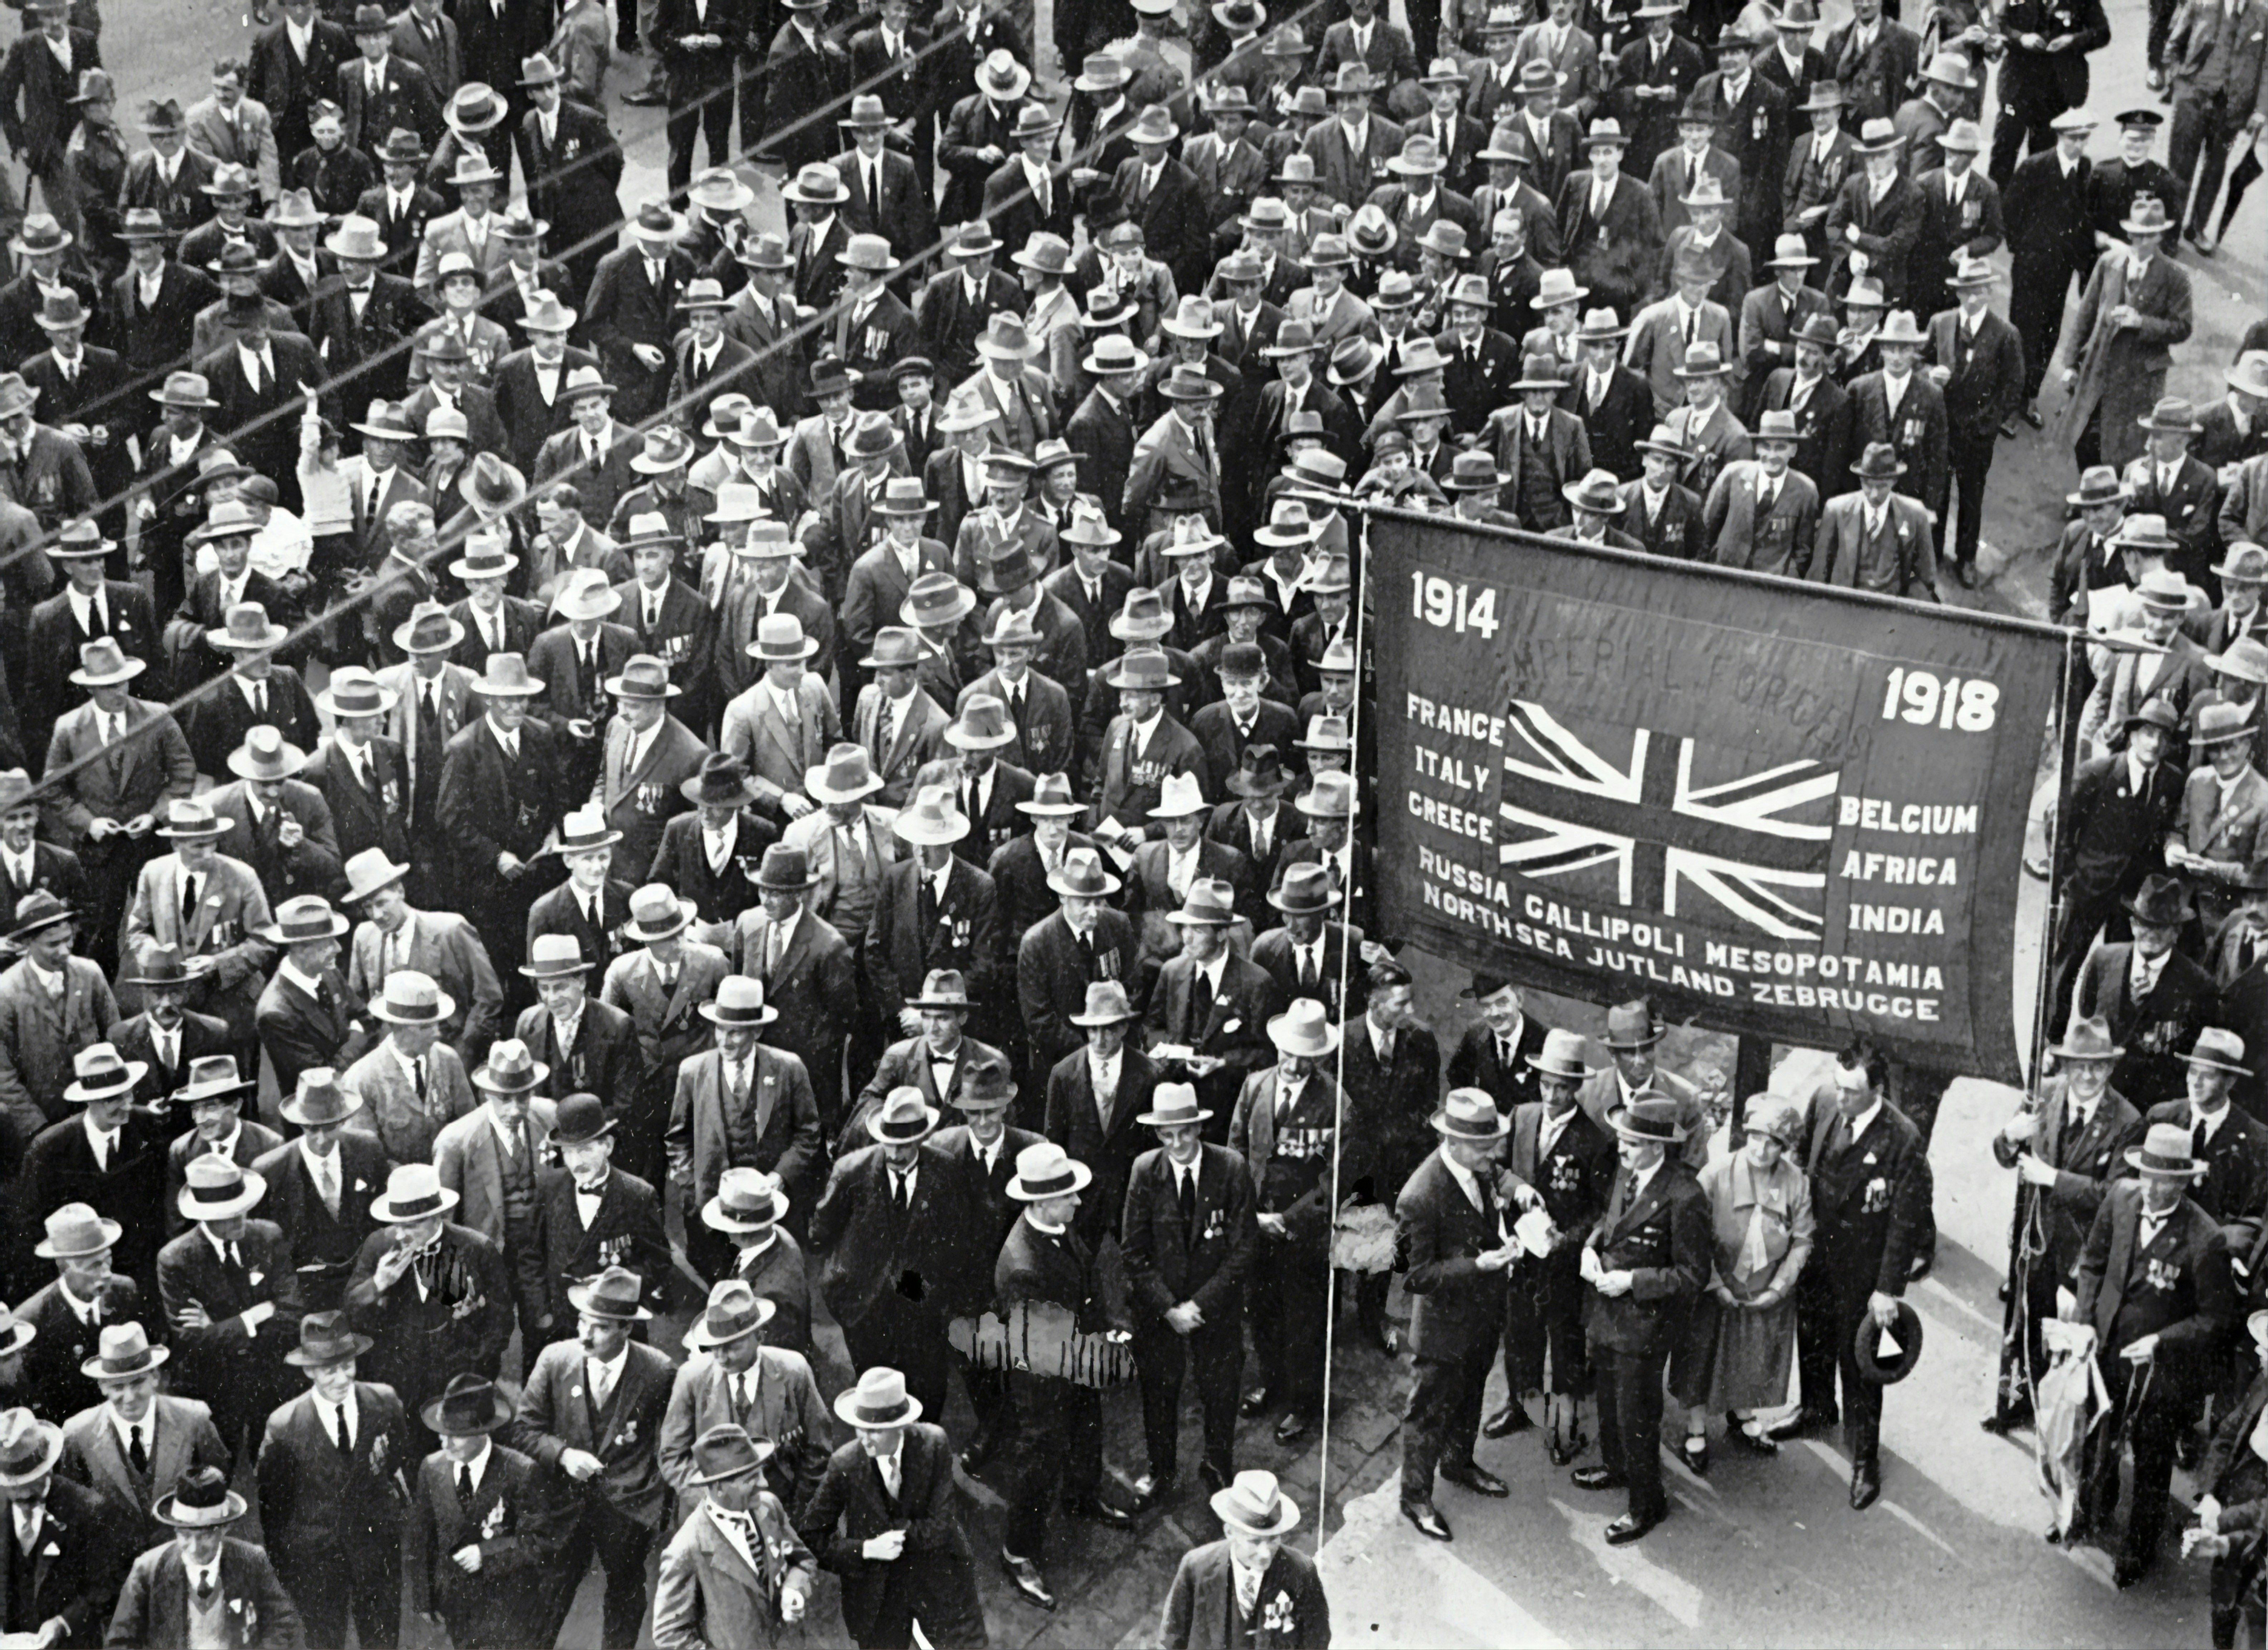 Crowds at the Anzac Day march. In the foreground is a banner proclaiming the engagements of Empire Forces (?) between 1914 and 1918. 